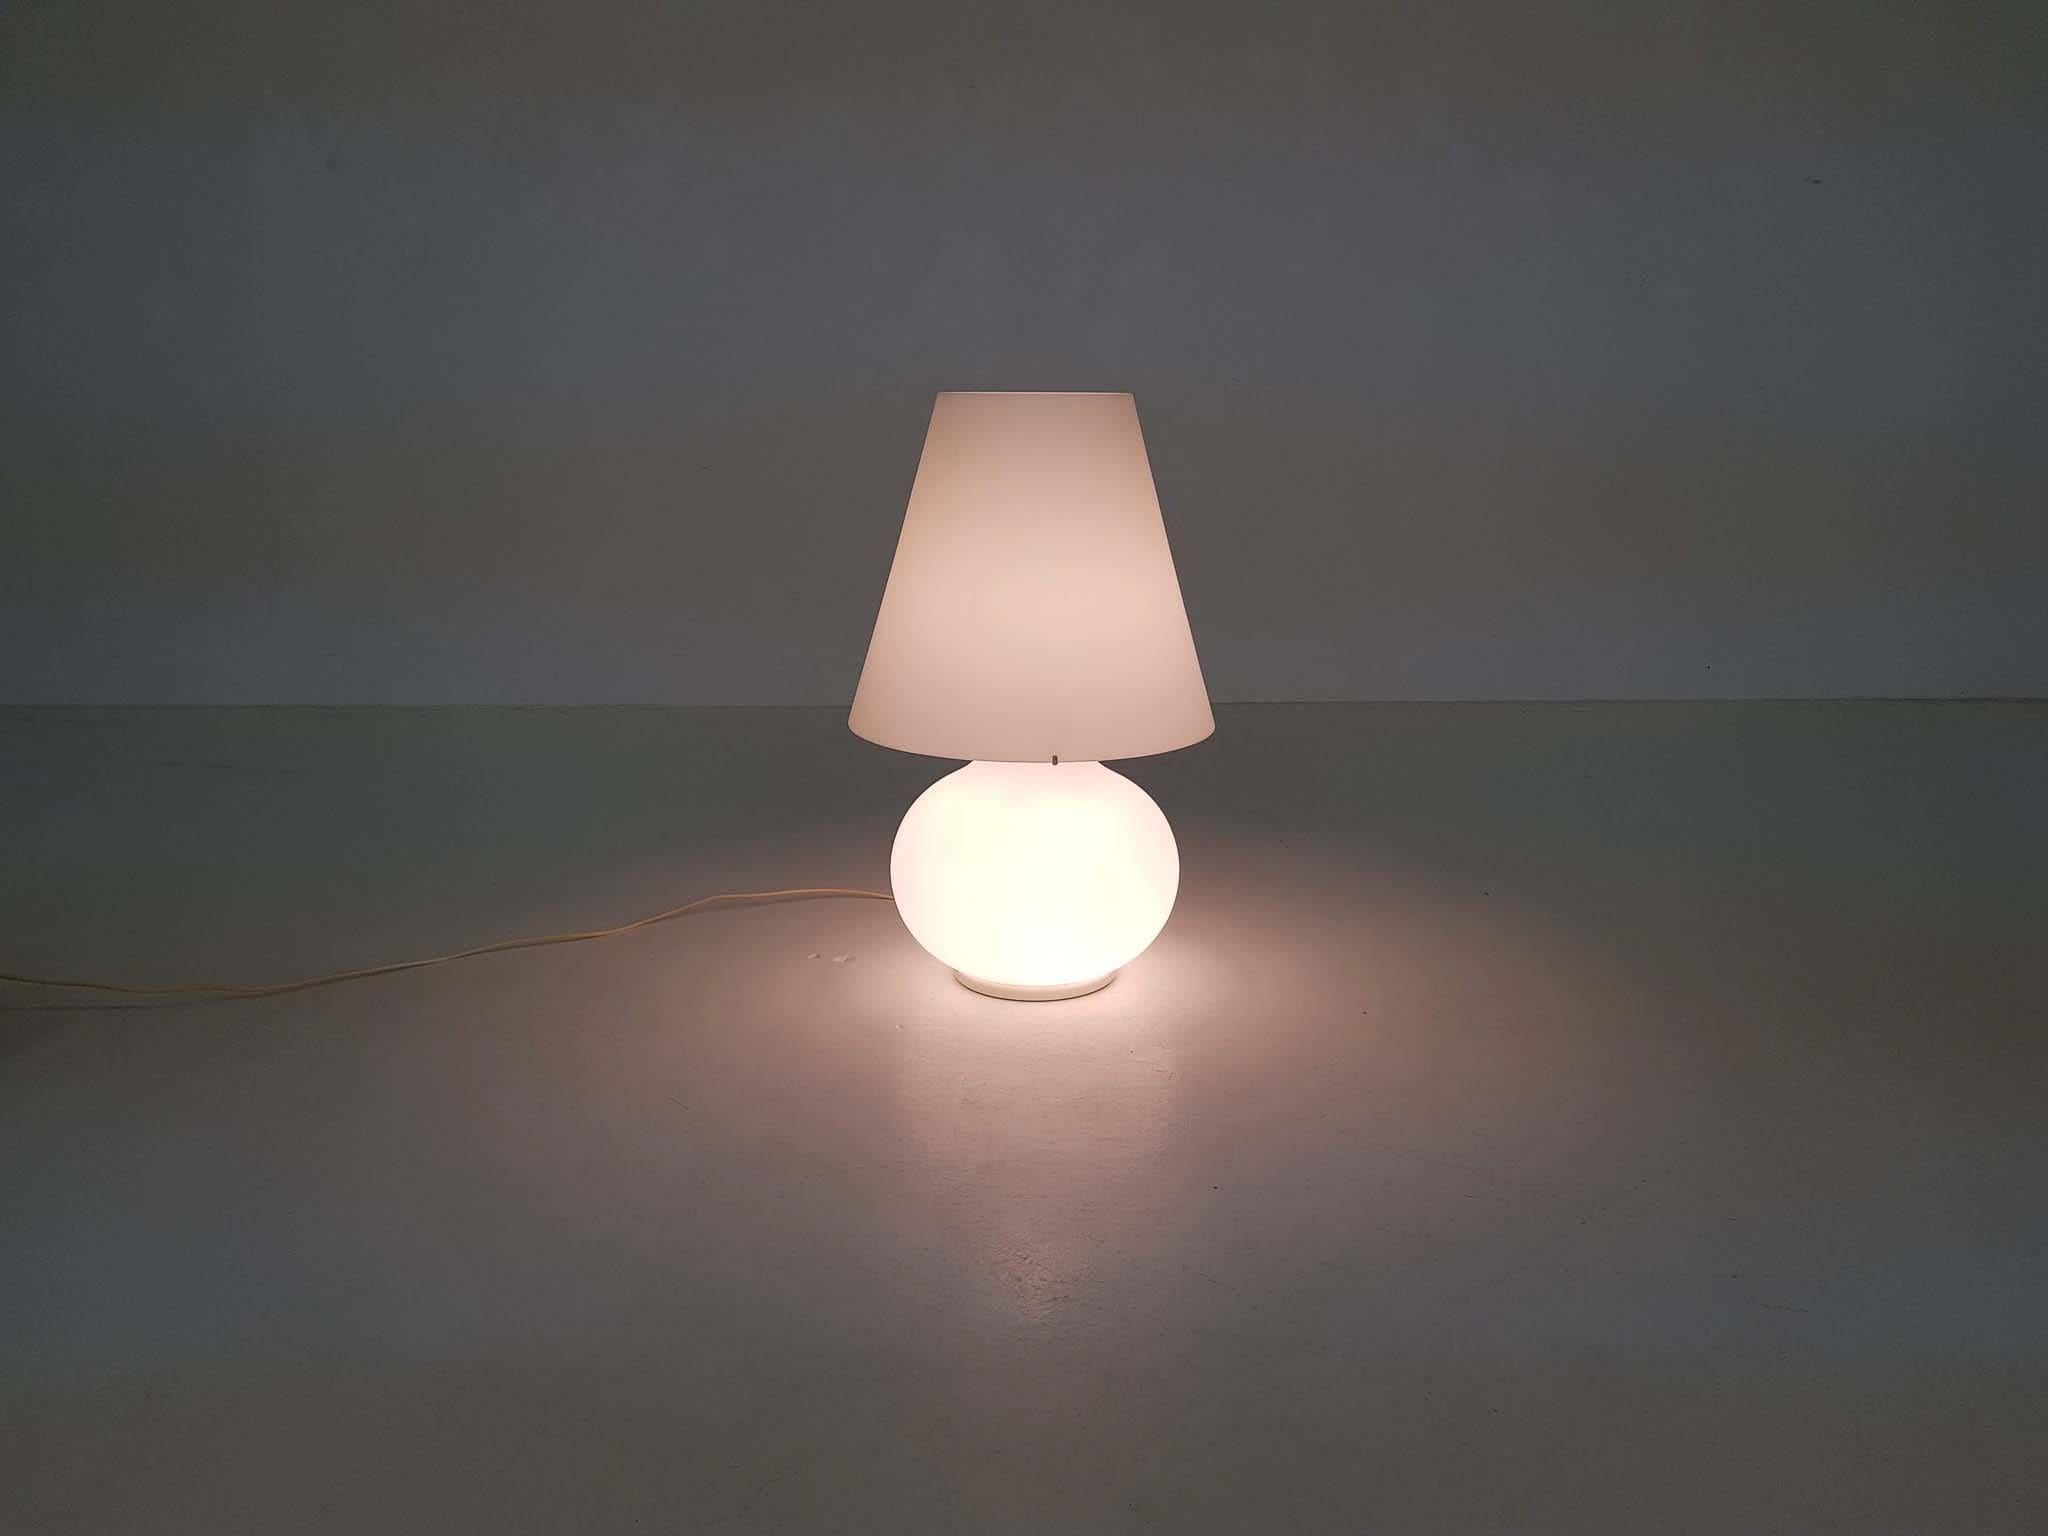 Paralume, Murano Due, “Ufficio Stile” Large glass table light, Italy
Large white milk glass table lamp with two light bulbs, one in the feet and one under the glass shade.